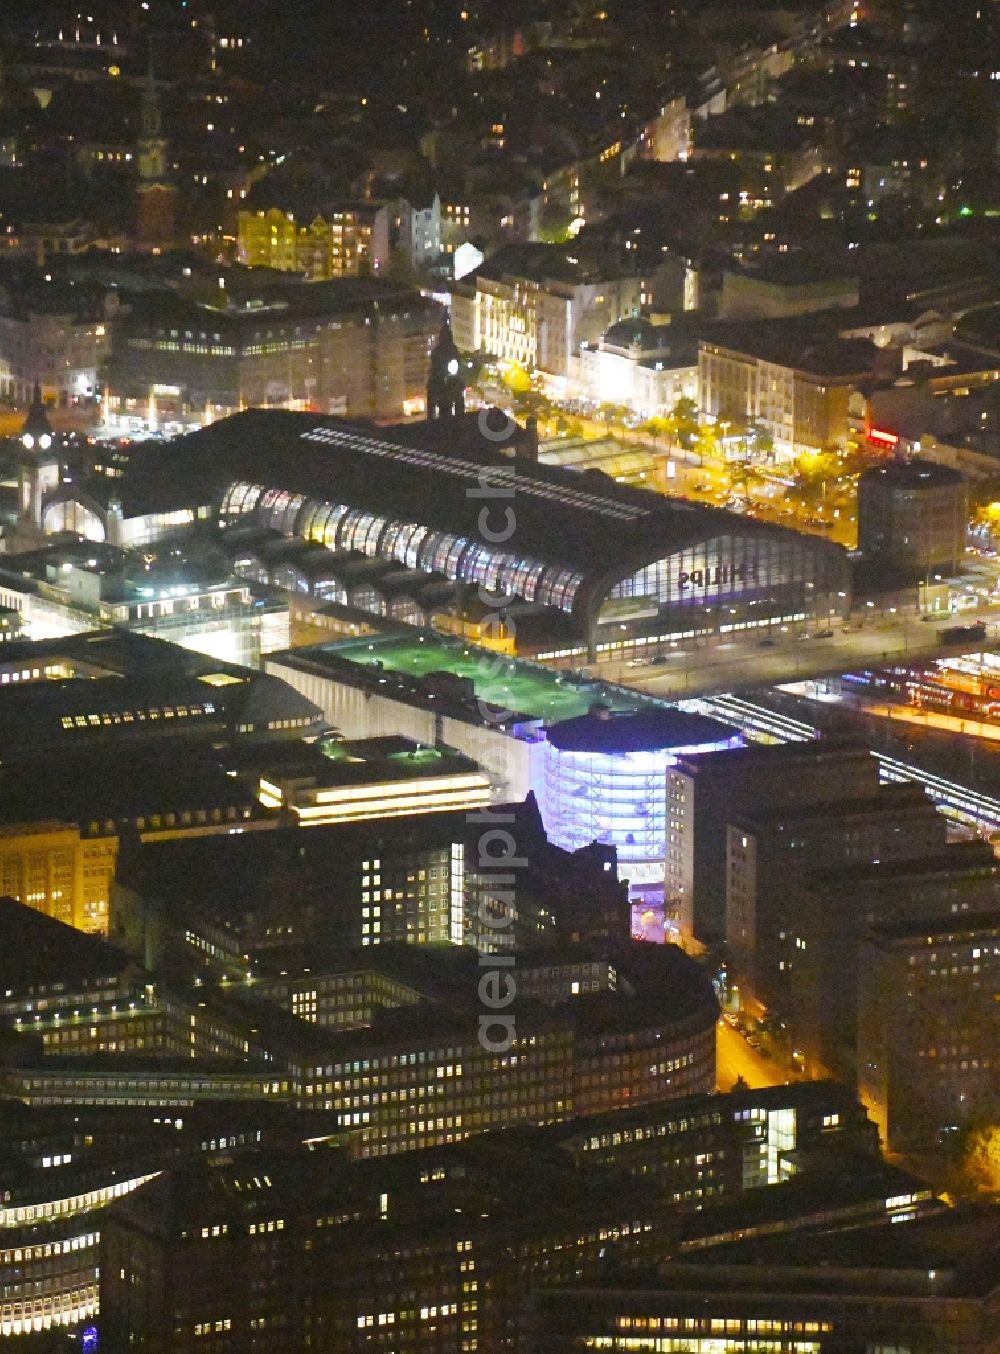 Hamburg at night from above - Night lighting Track progress and building of the main station of the railway in Hamburg, Germany